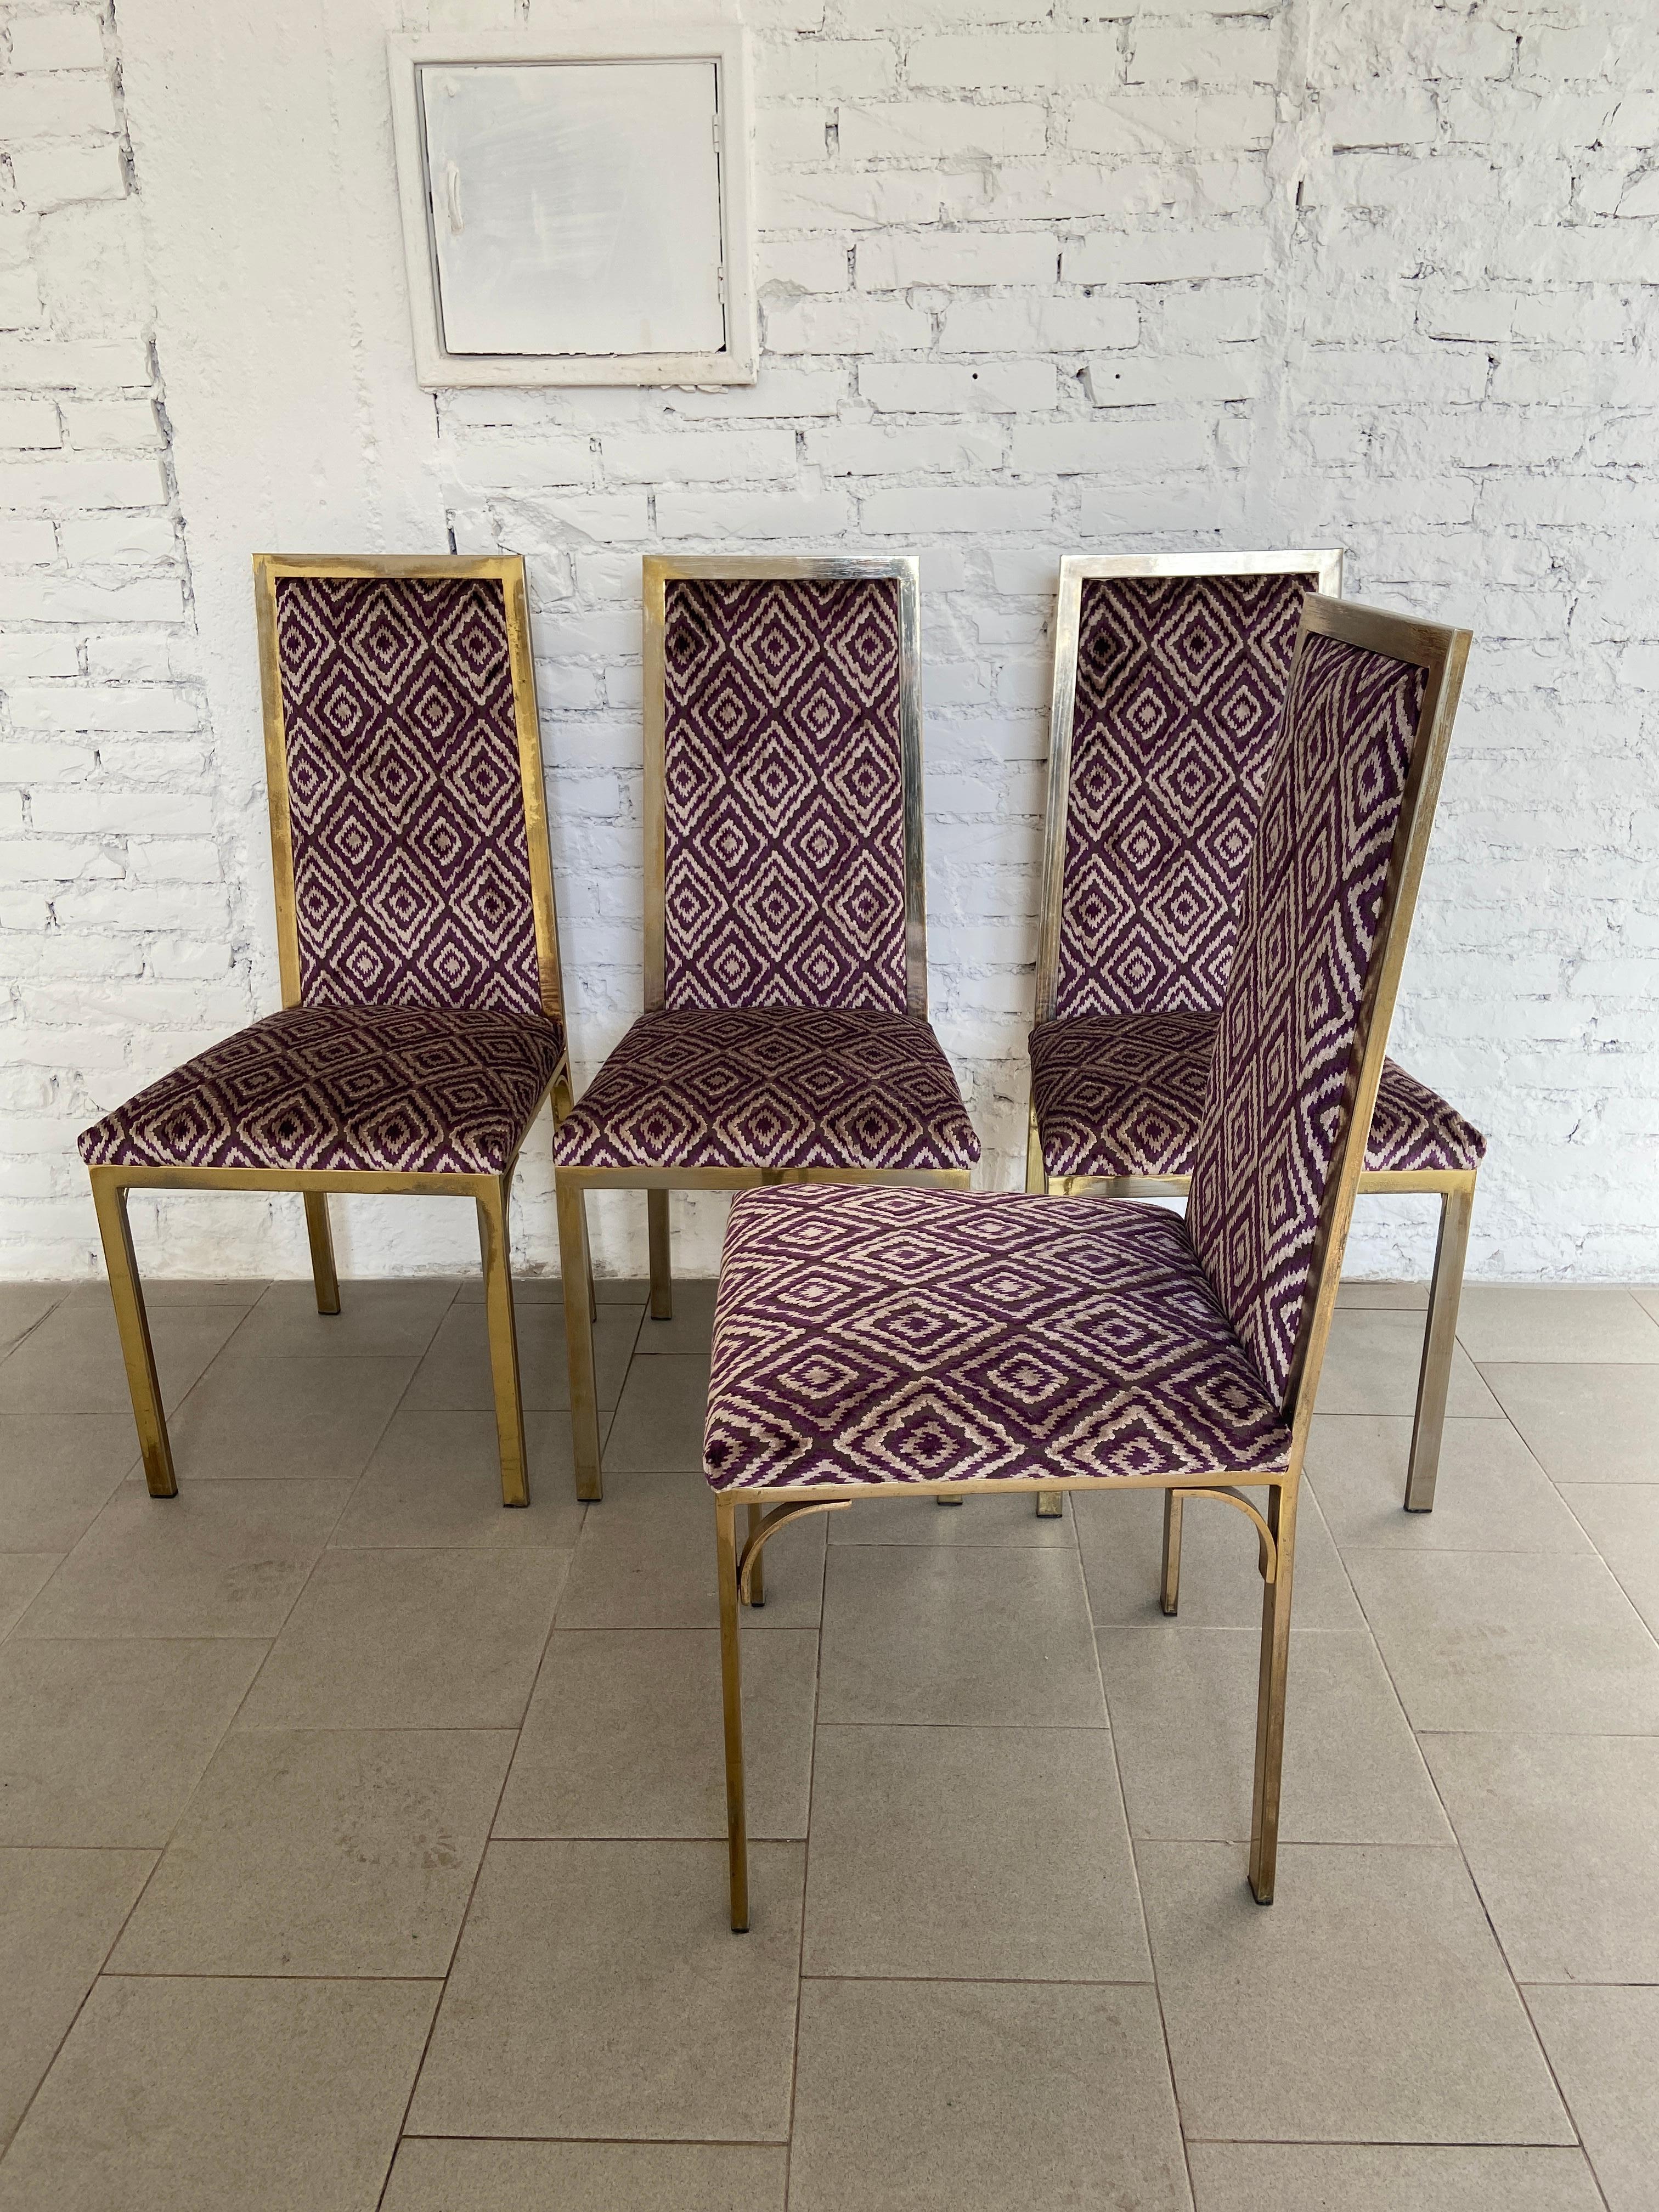 Late 20th Century French Mid-Century Modern Set of 4 Pierre Cardin Gild Metal Chairs, 1970s